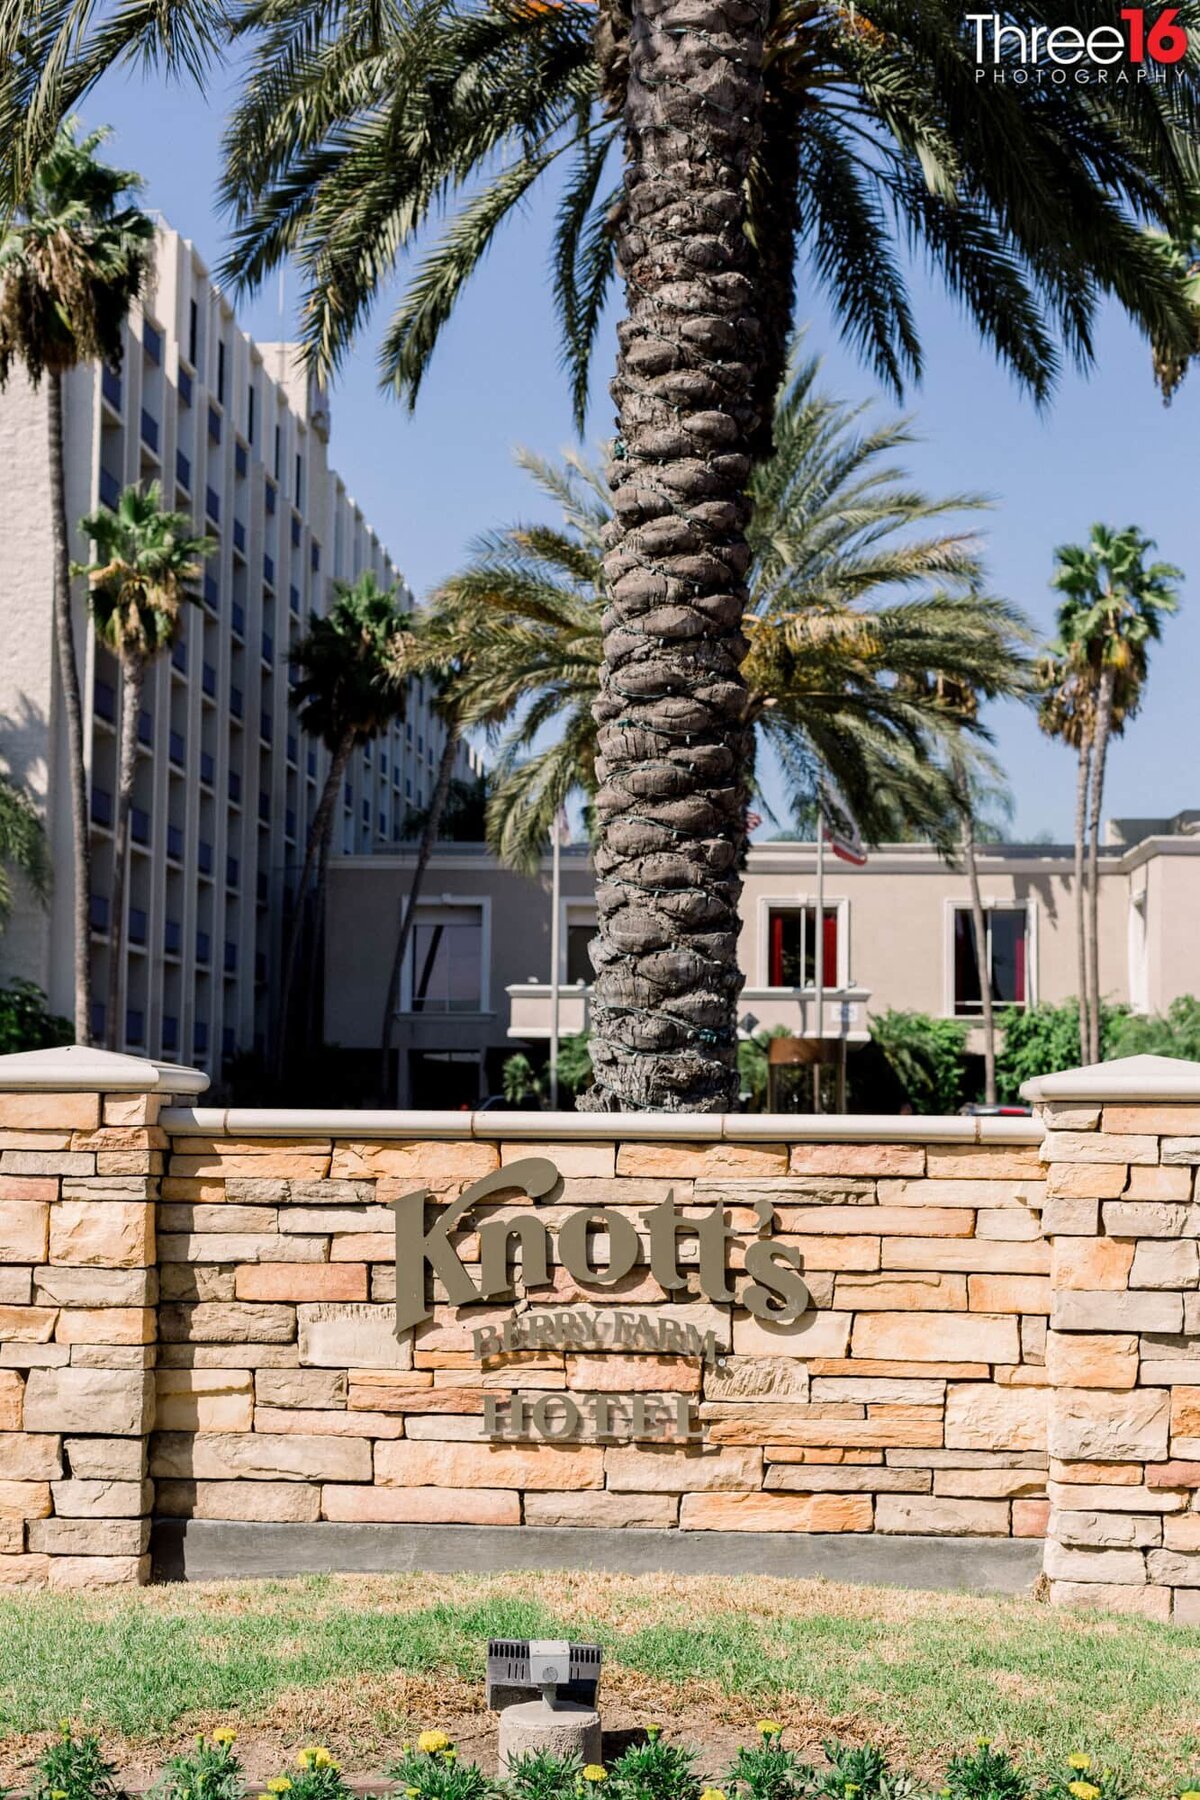 Knott's Berry Farm Hotel signage under the palm trees